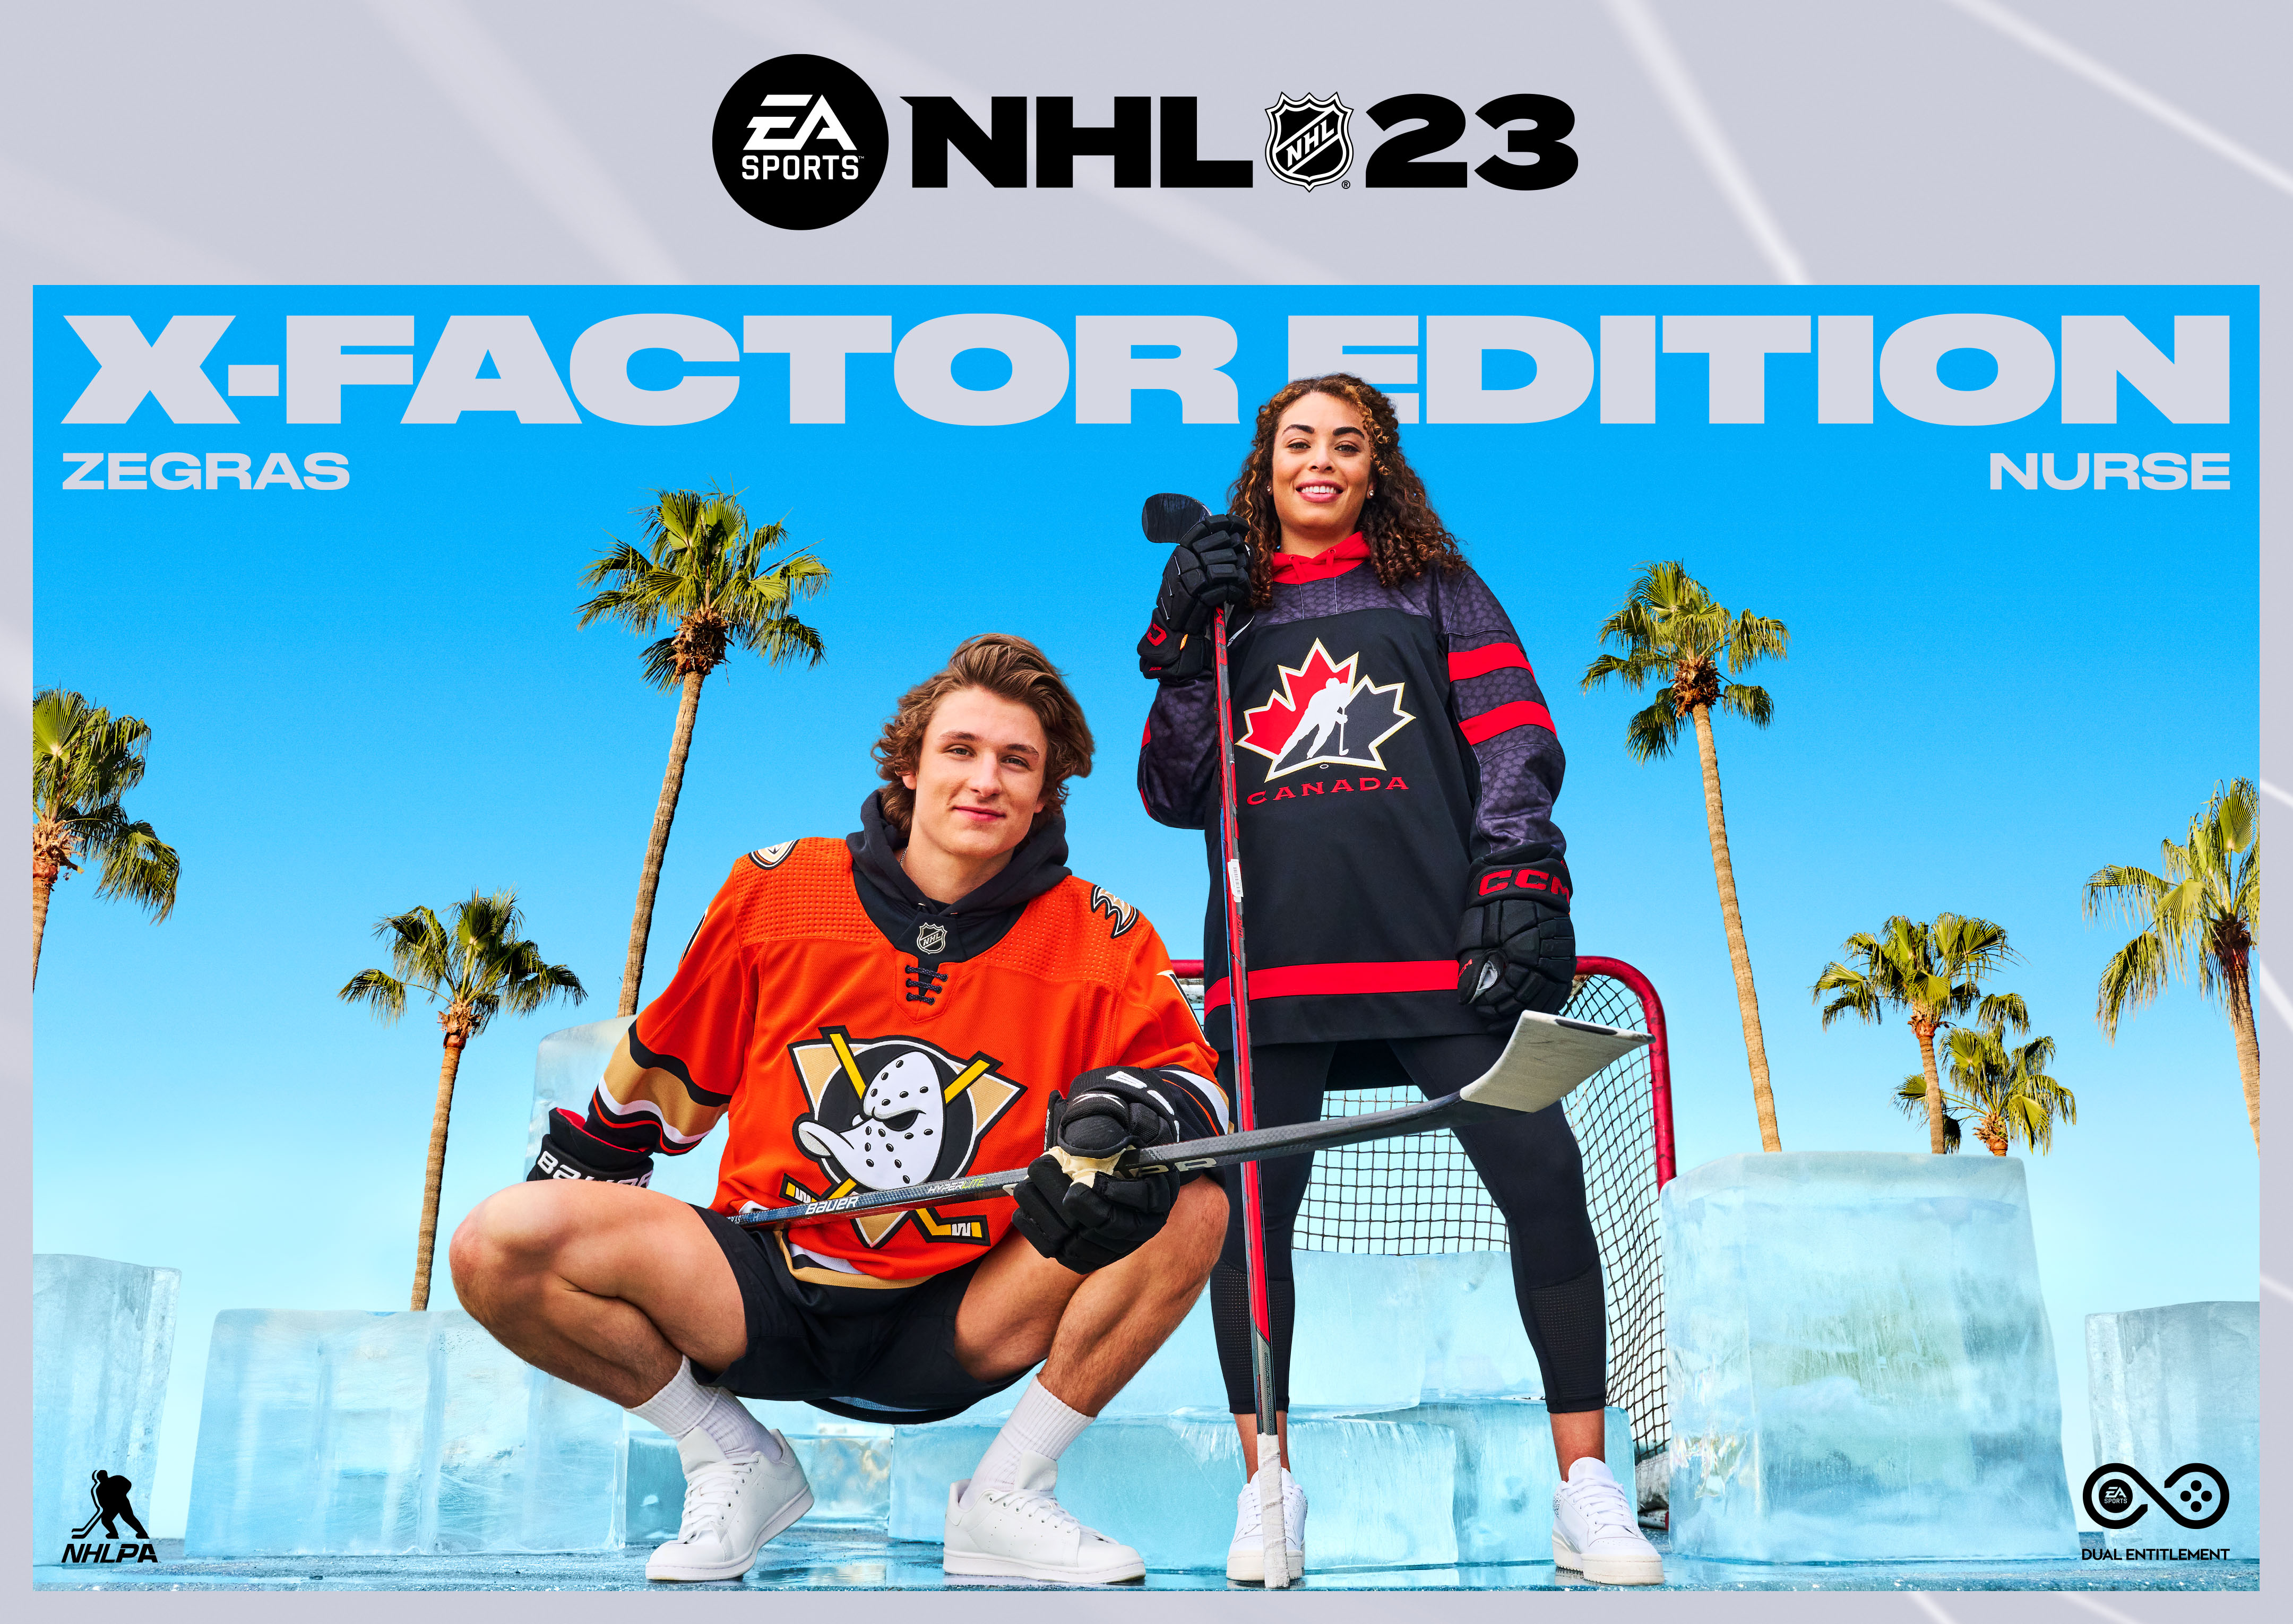 key art for the X-Factor Edition of NHL 23, featuring a silver background with the game’s logo above an image of Trevor Zegras crouching while holding a hockey stick next to Sarah Nurse standing with a hockey stick, in front of blocks of ice, a hockey net, and palm trees